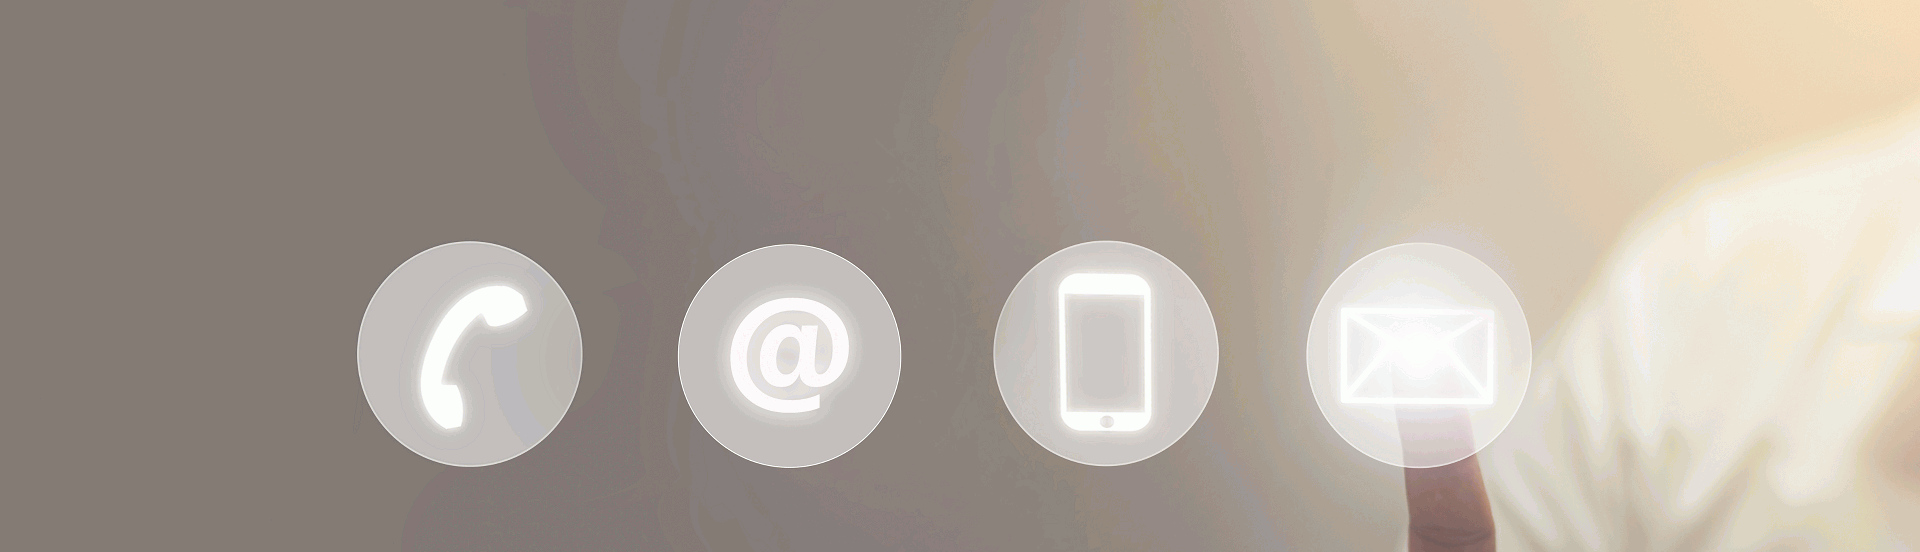 icons of call, @, phone, and message